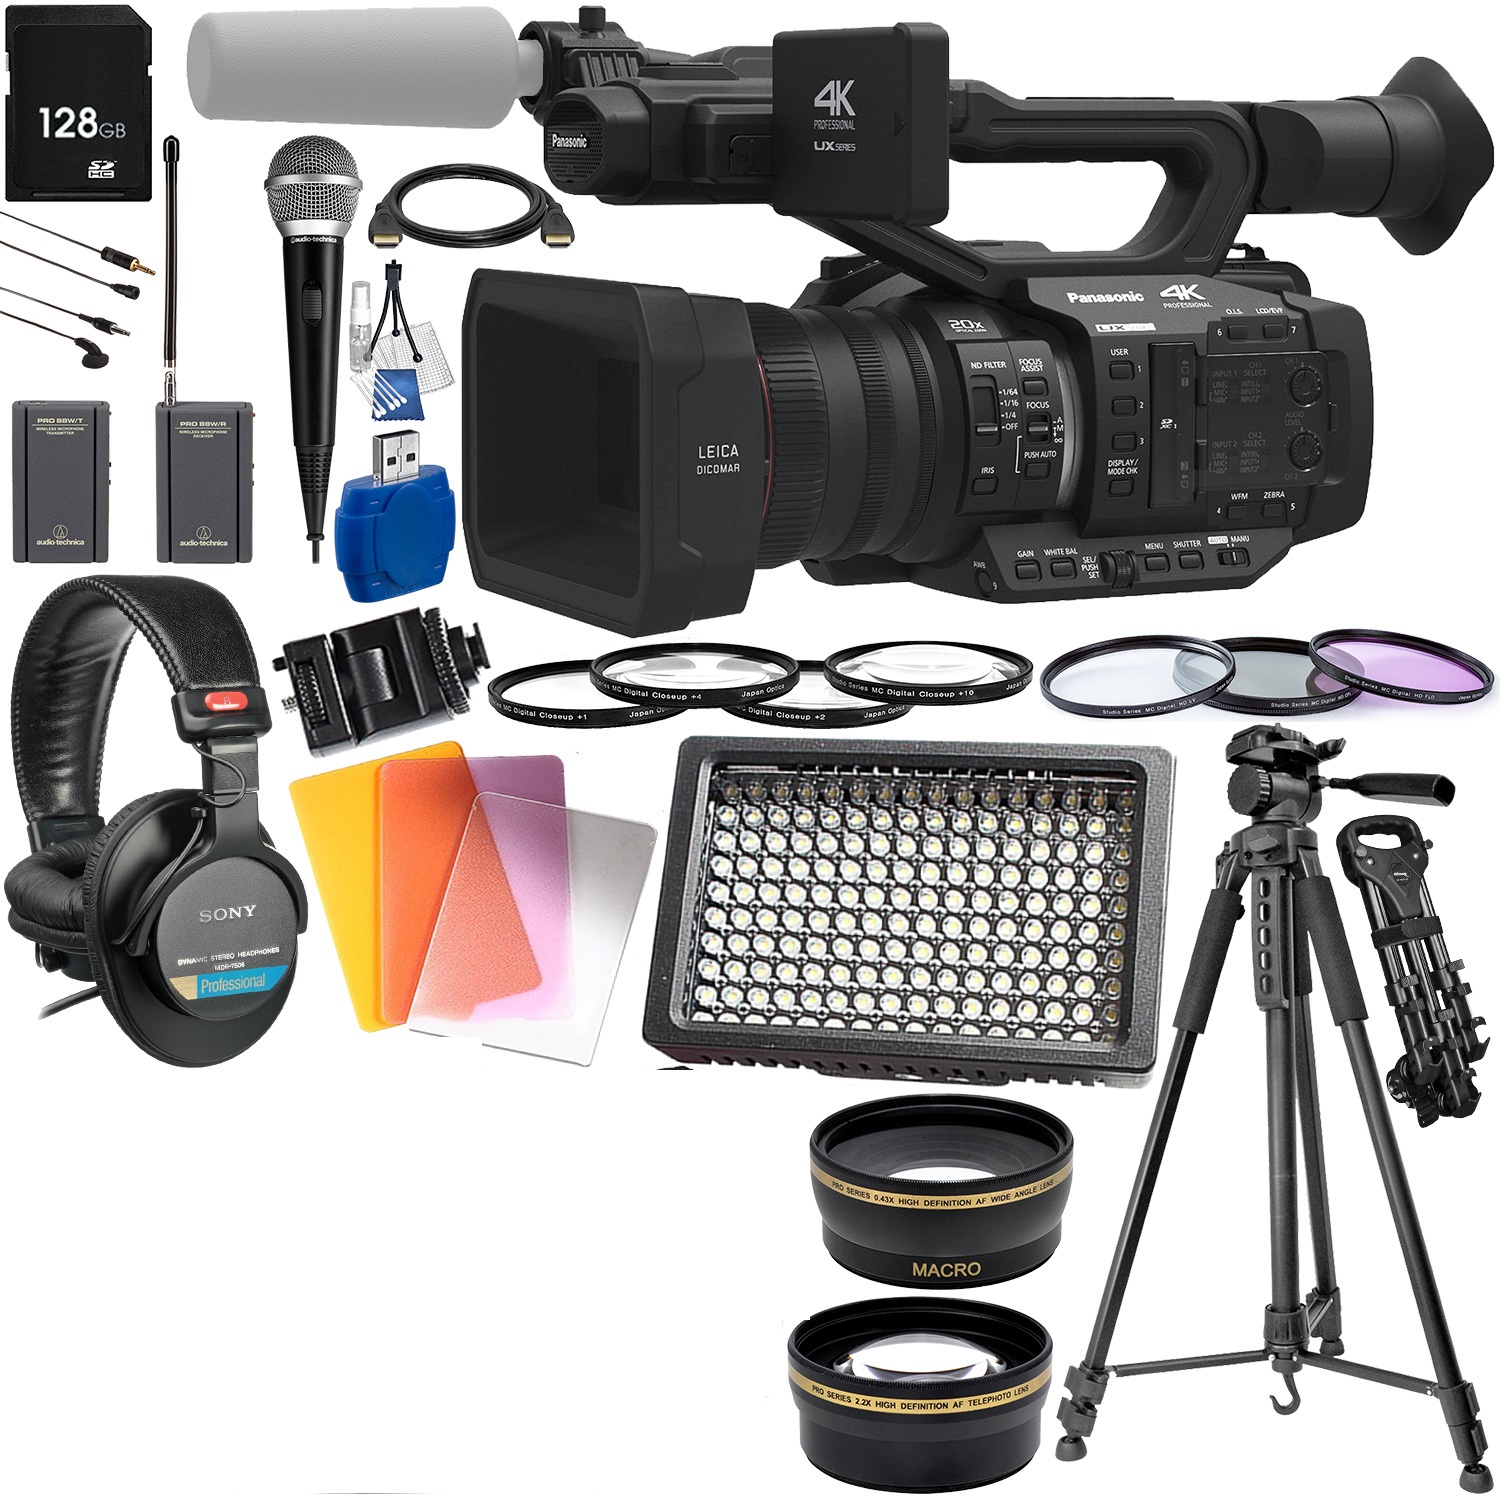 Panasonic AG-UX180 4K Professional Camcorder with Deluxe Accessory Bundle